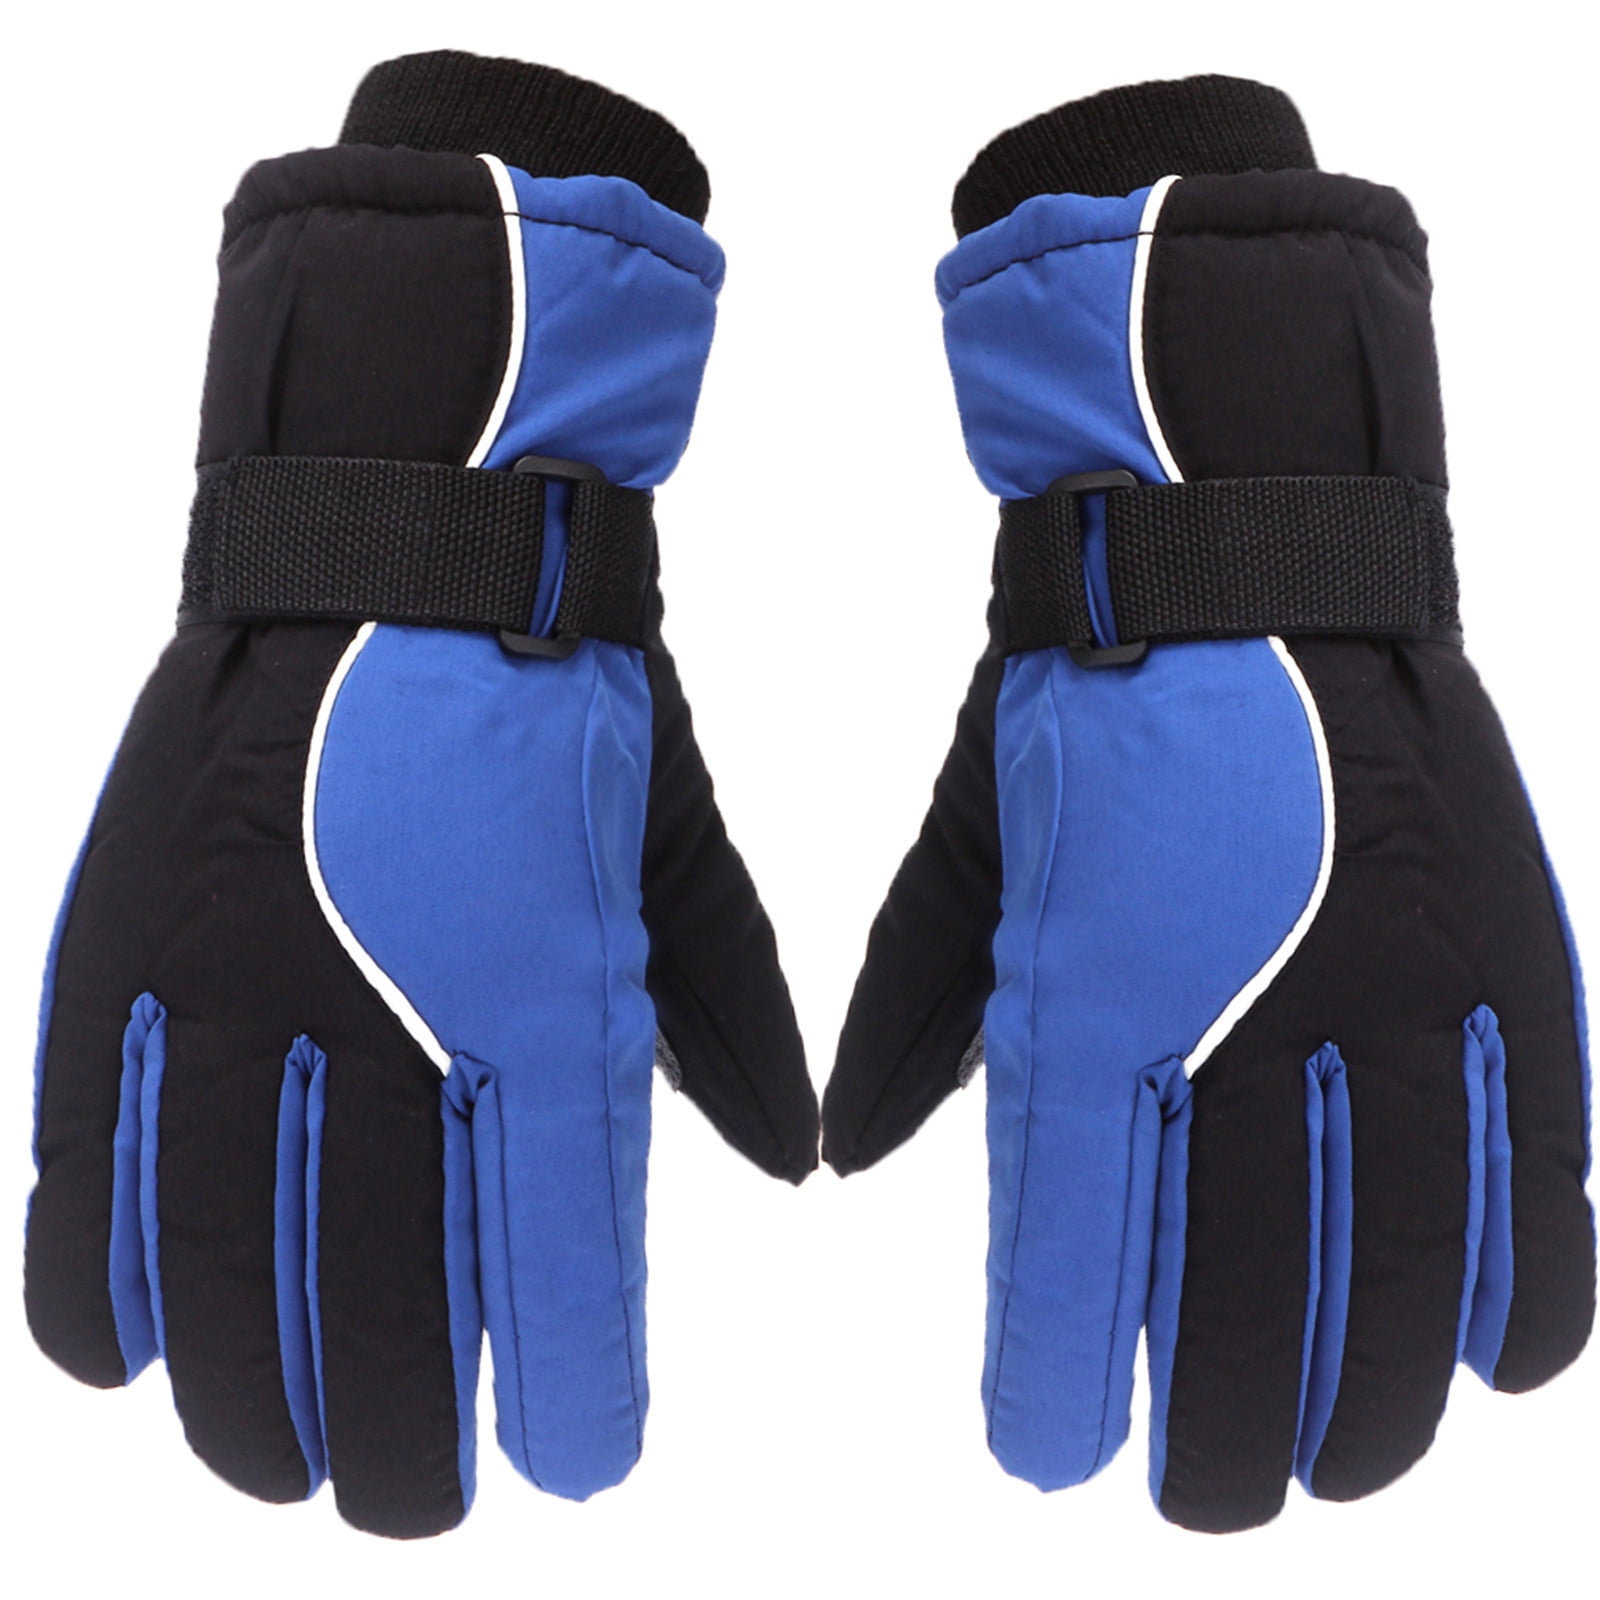 Winter Gloves for Kids Boys Girls Insulated Waterproof Windproof  Snowboarding Riding Ski Gloves Warm Thermal Cold Weather Snow Gloves 